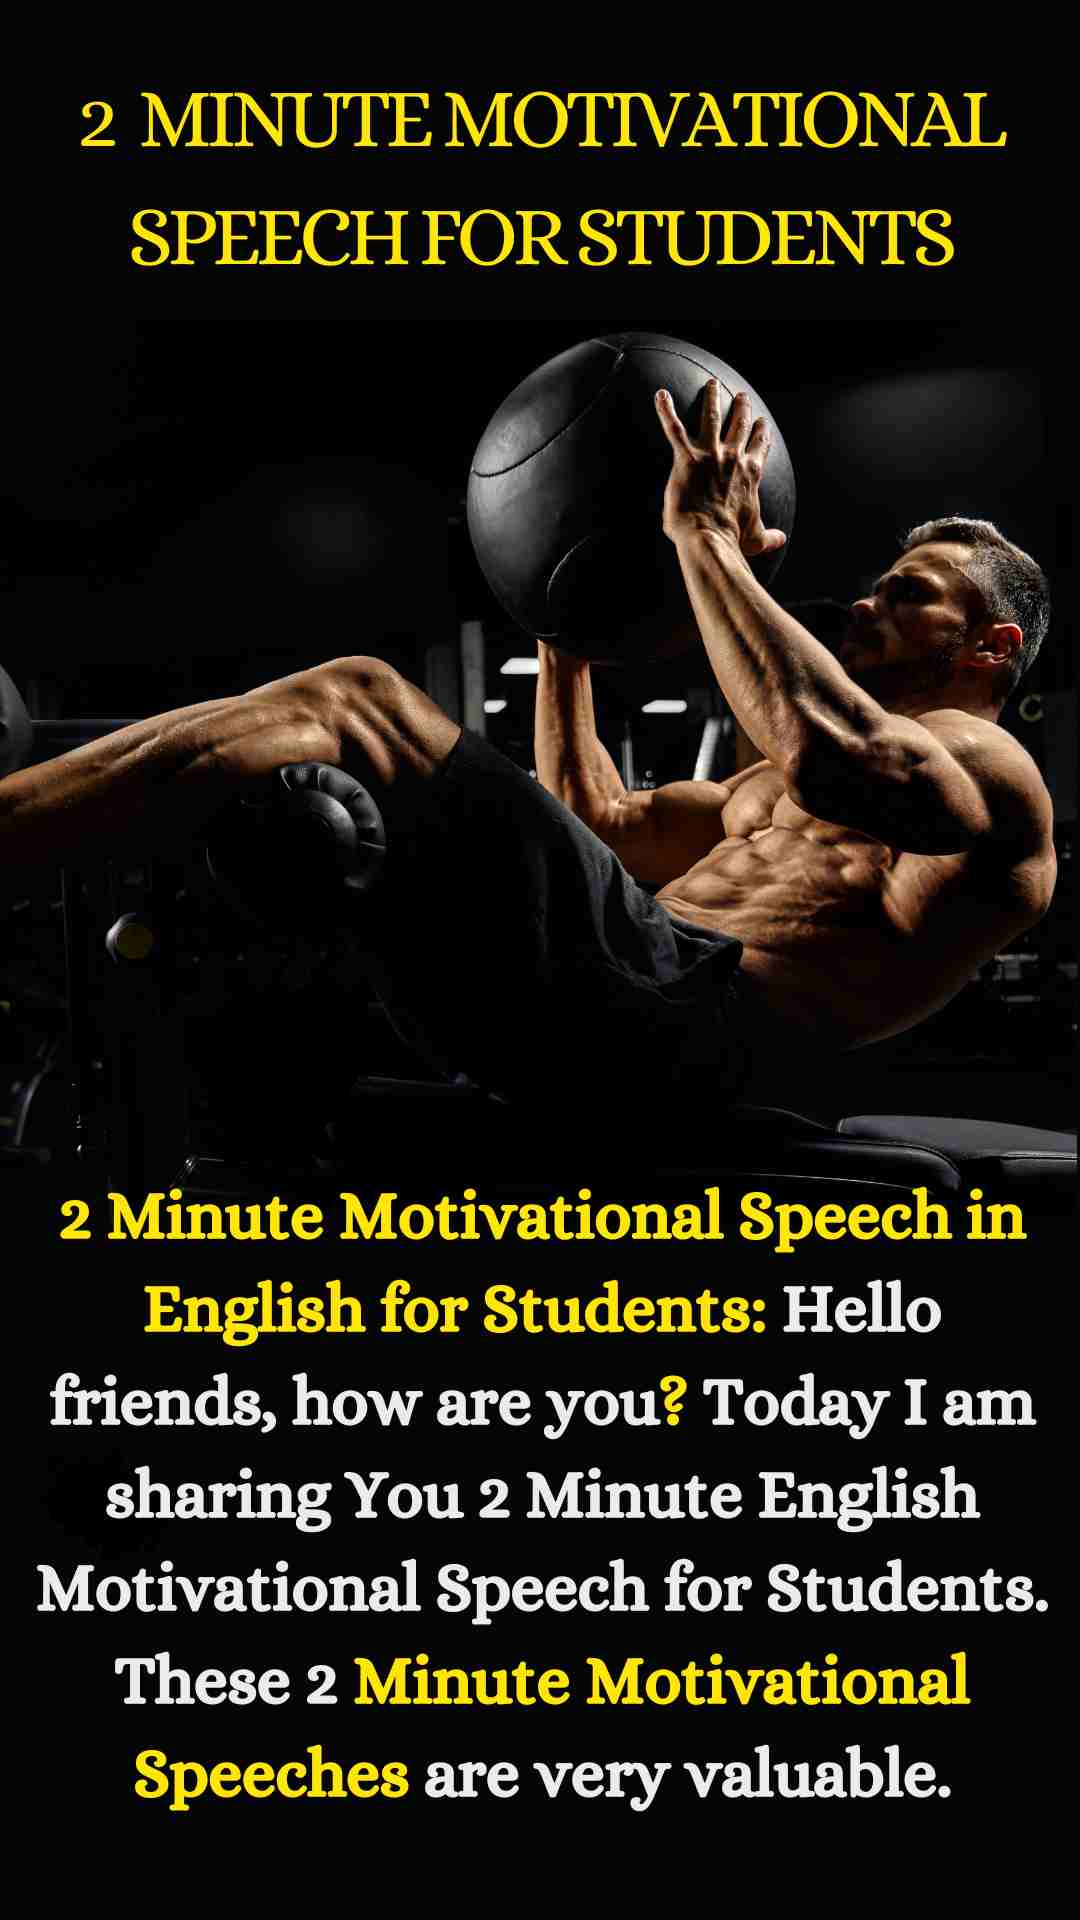 2 minute Motivational Speech for students